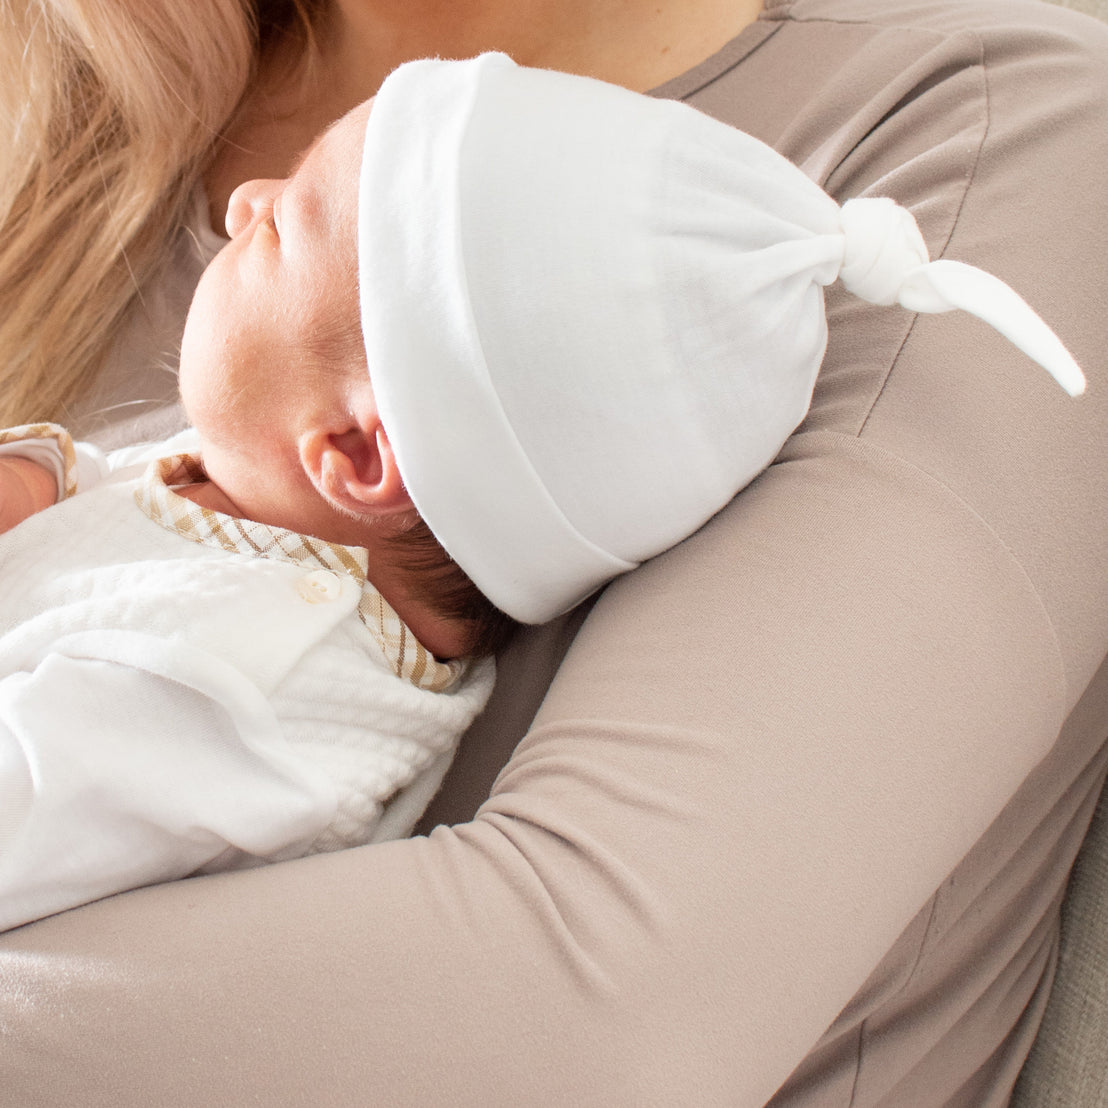 A close-up image of a newborn sleeping peacefully on a woman's shoulder. The baby wears a white Dylan Knot Cap, including a hat, and is wrapped in a white blanket.